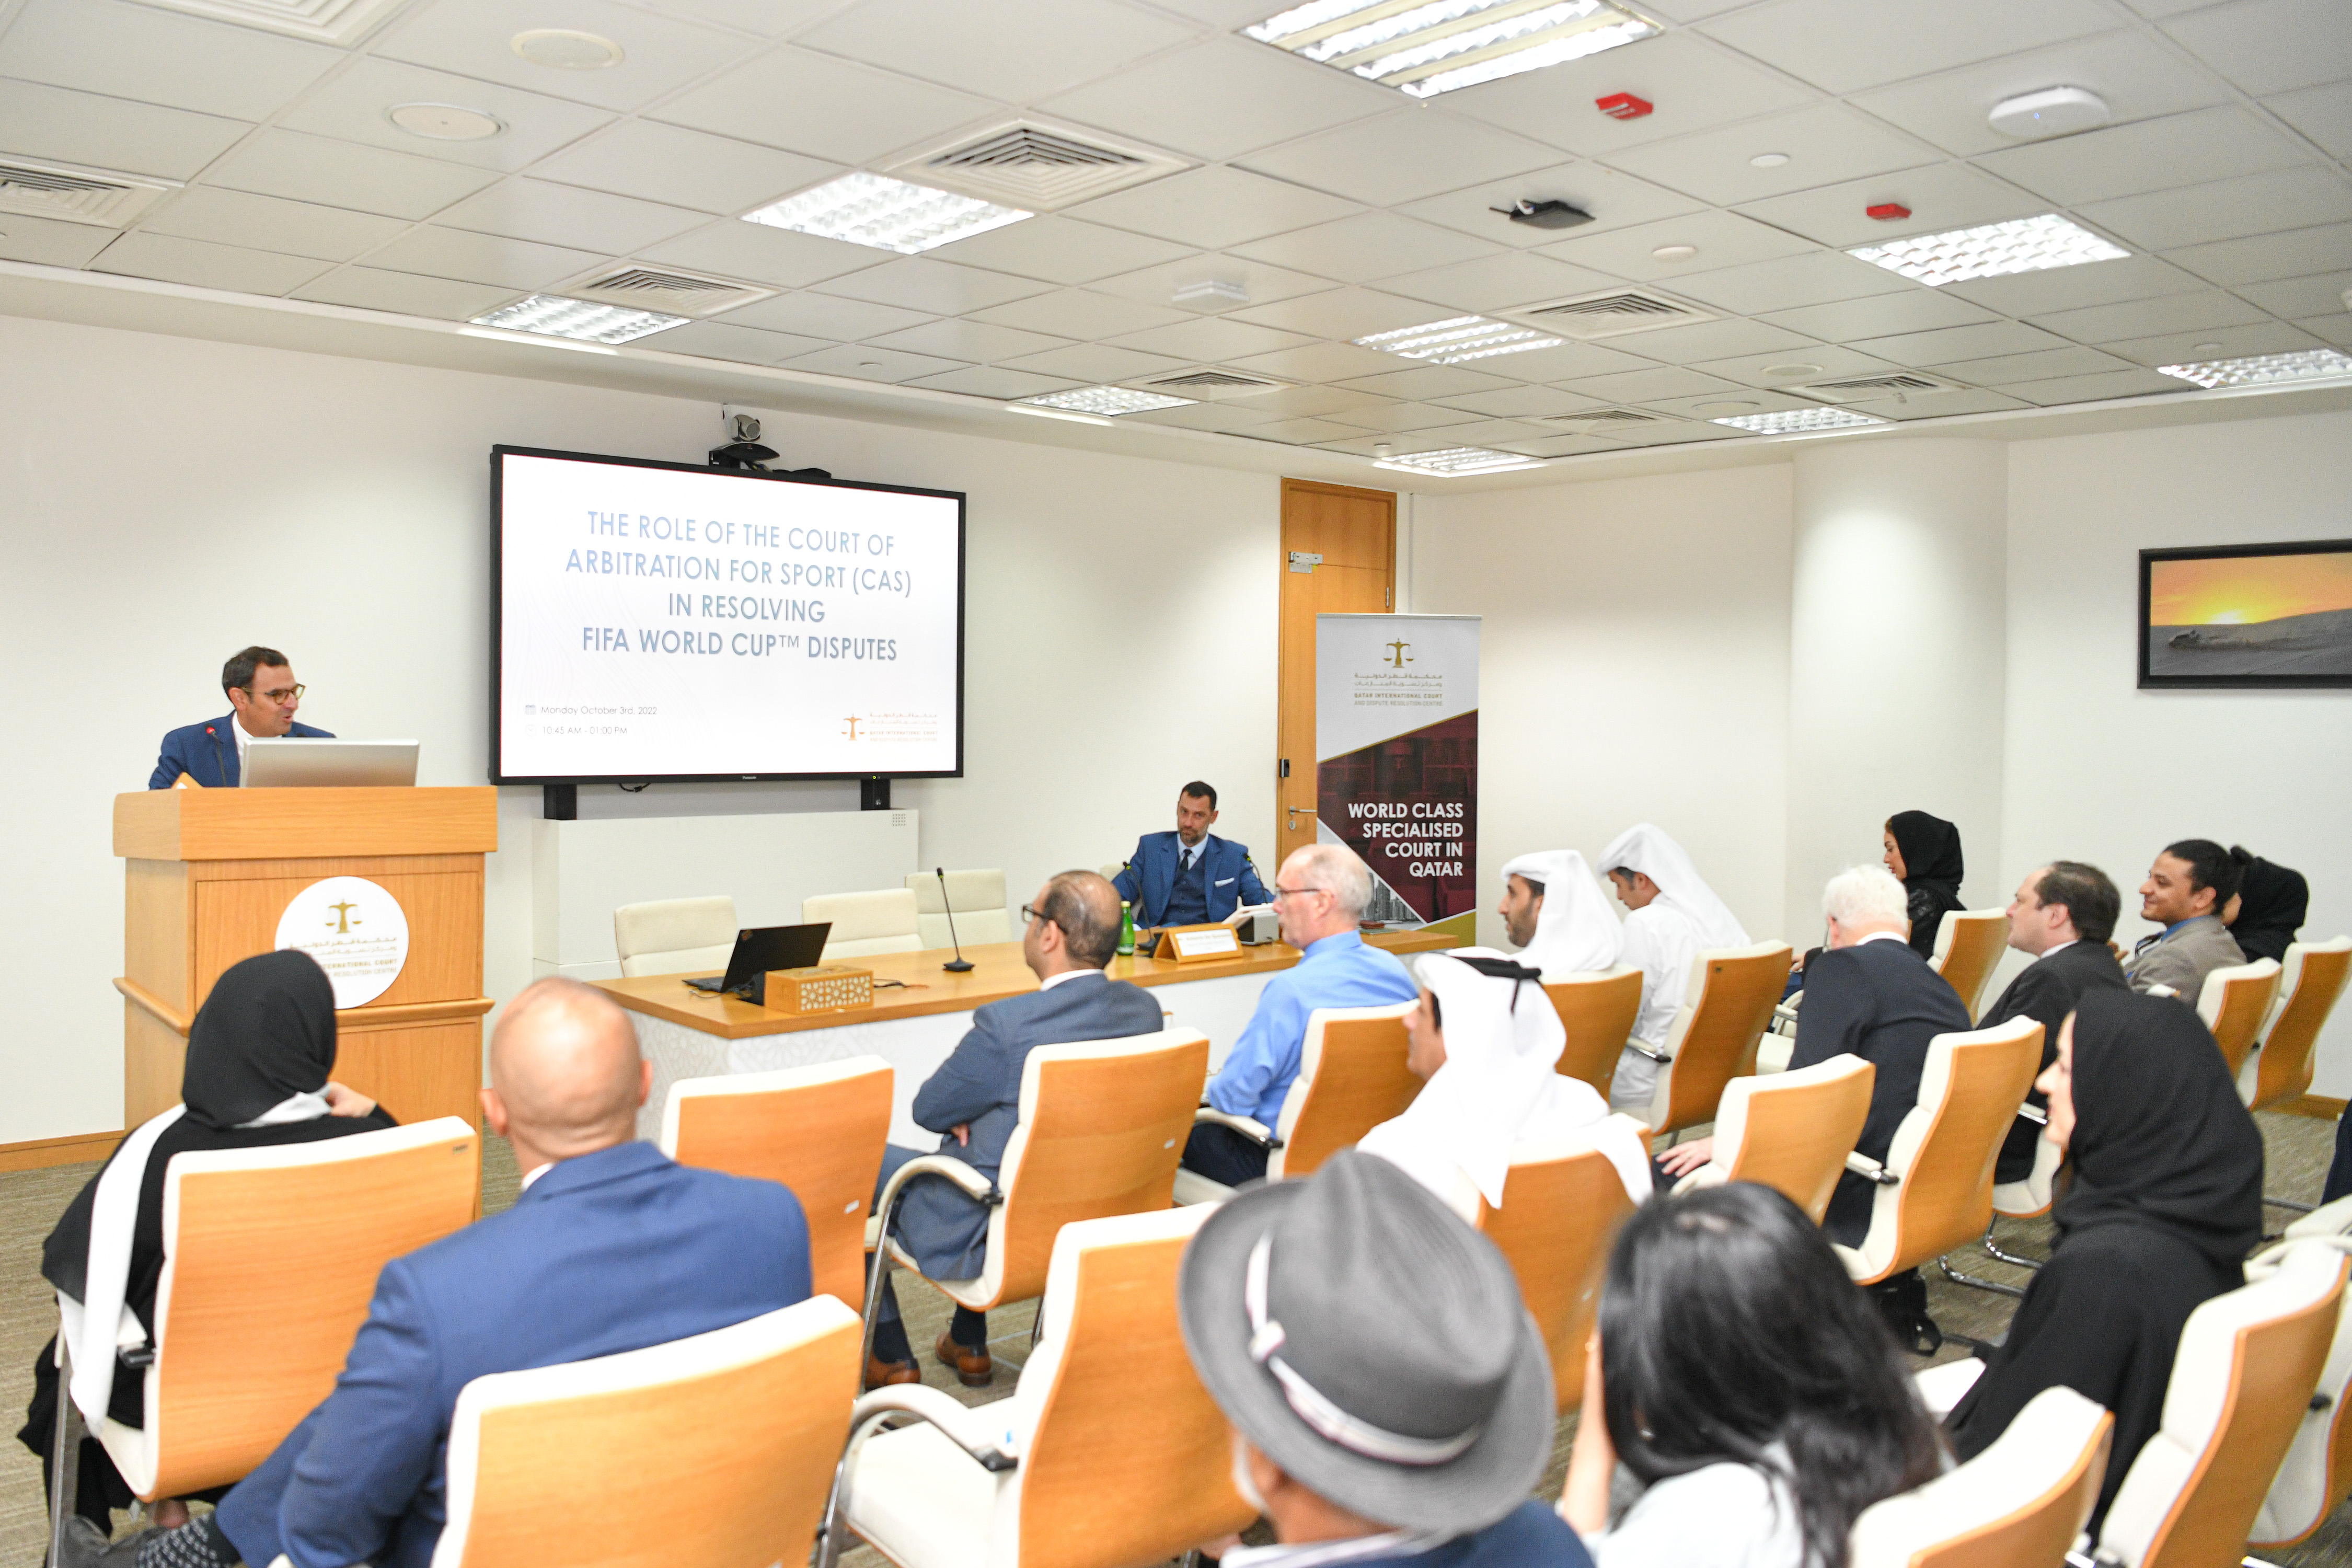 Qatar International Court Hosts Seminar on the Role of the Court of Arbitration for Sport (CAS) in Resolving Sports Disputes